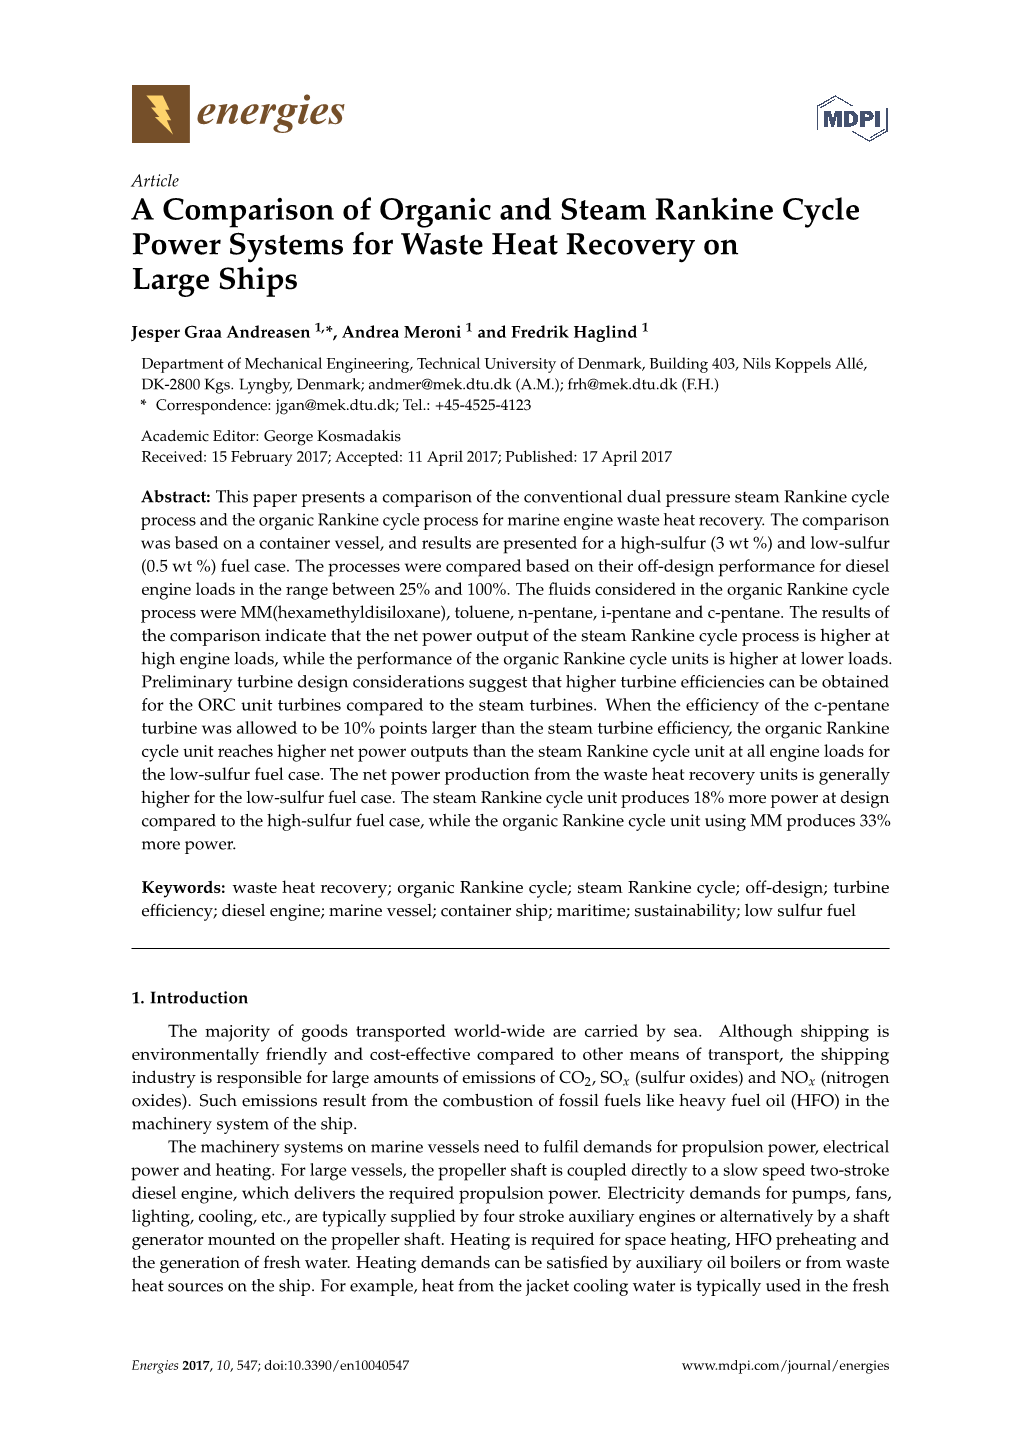 A Comparison of Organic and Steam Rankine Cycle Power Systems for Waste Heat Recovery on Large Ships